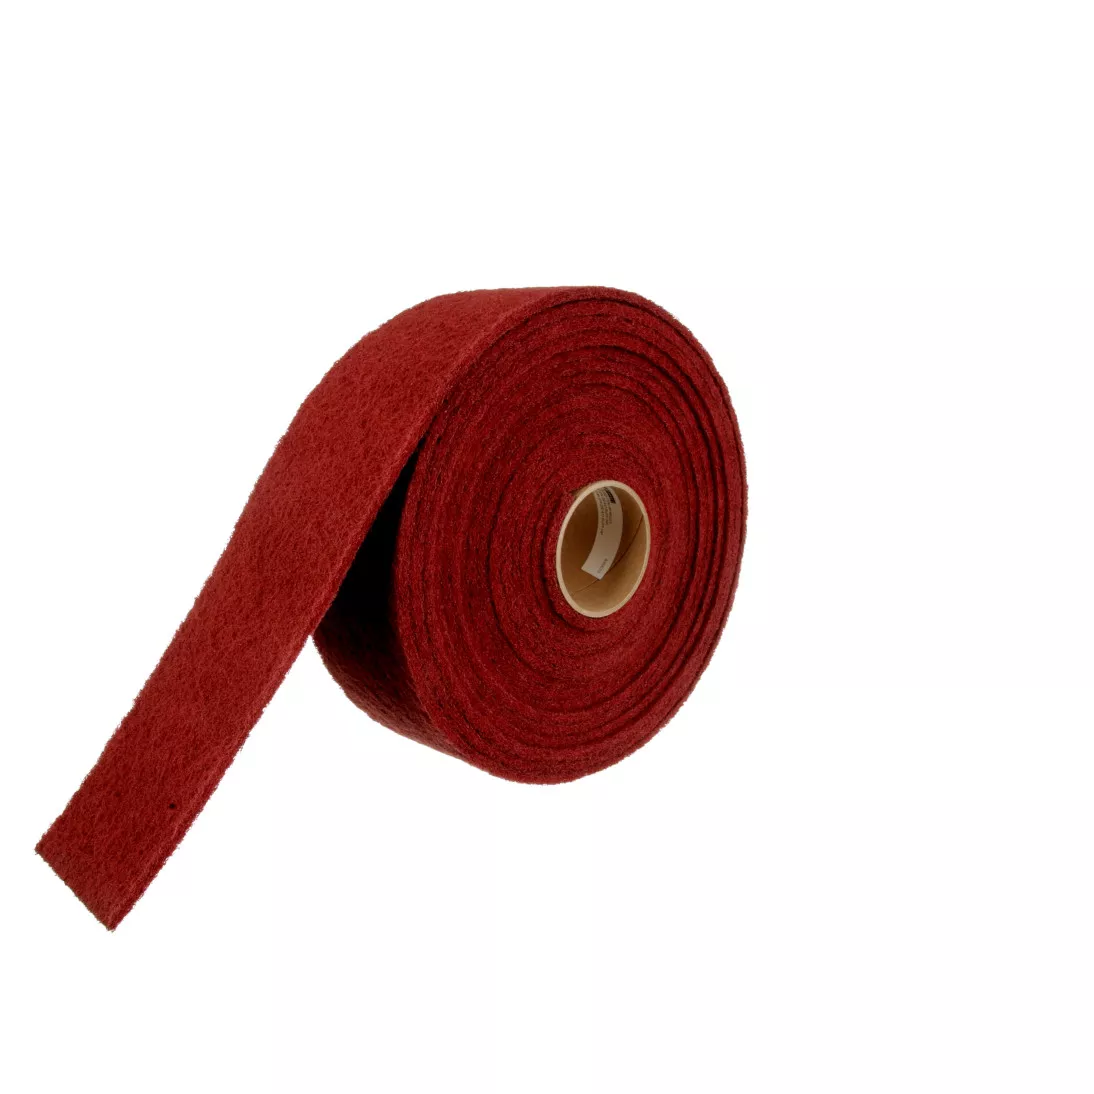 Standard Abrasives™ Aluminum Oxide HP Buff and Blend Roll, 830070, Very
Fine, 4 in x 30 ft, 3 ea/Case